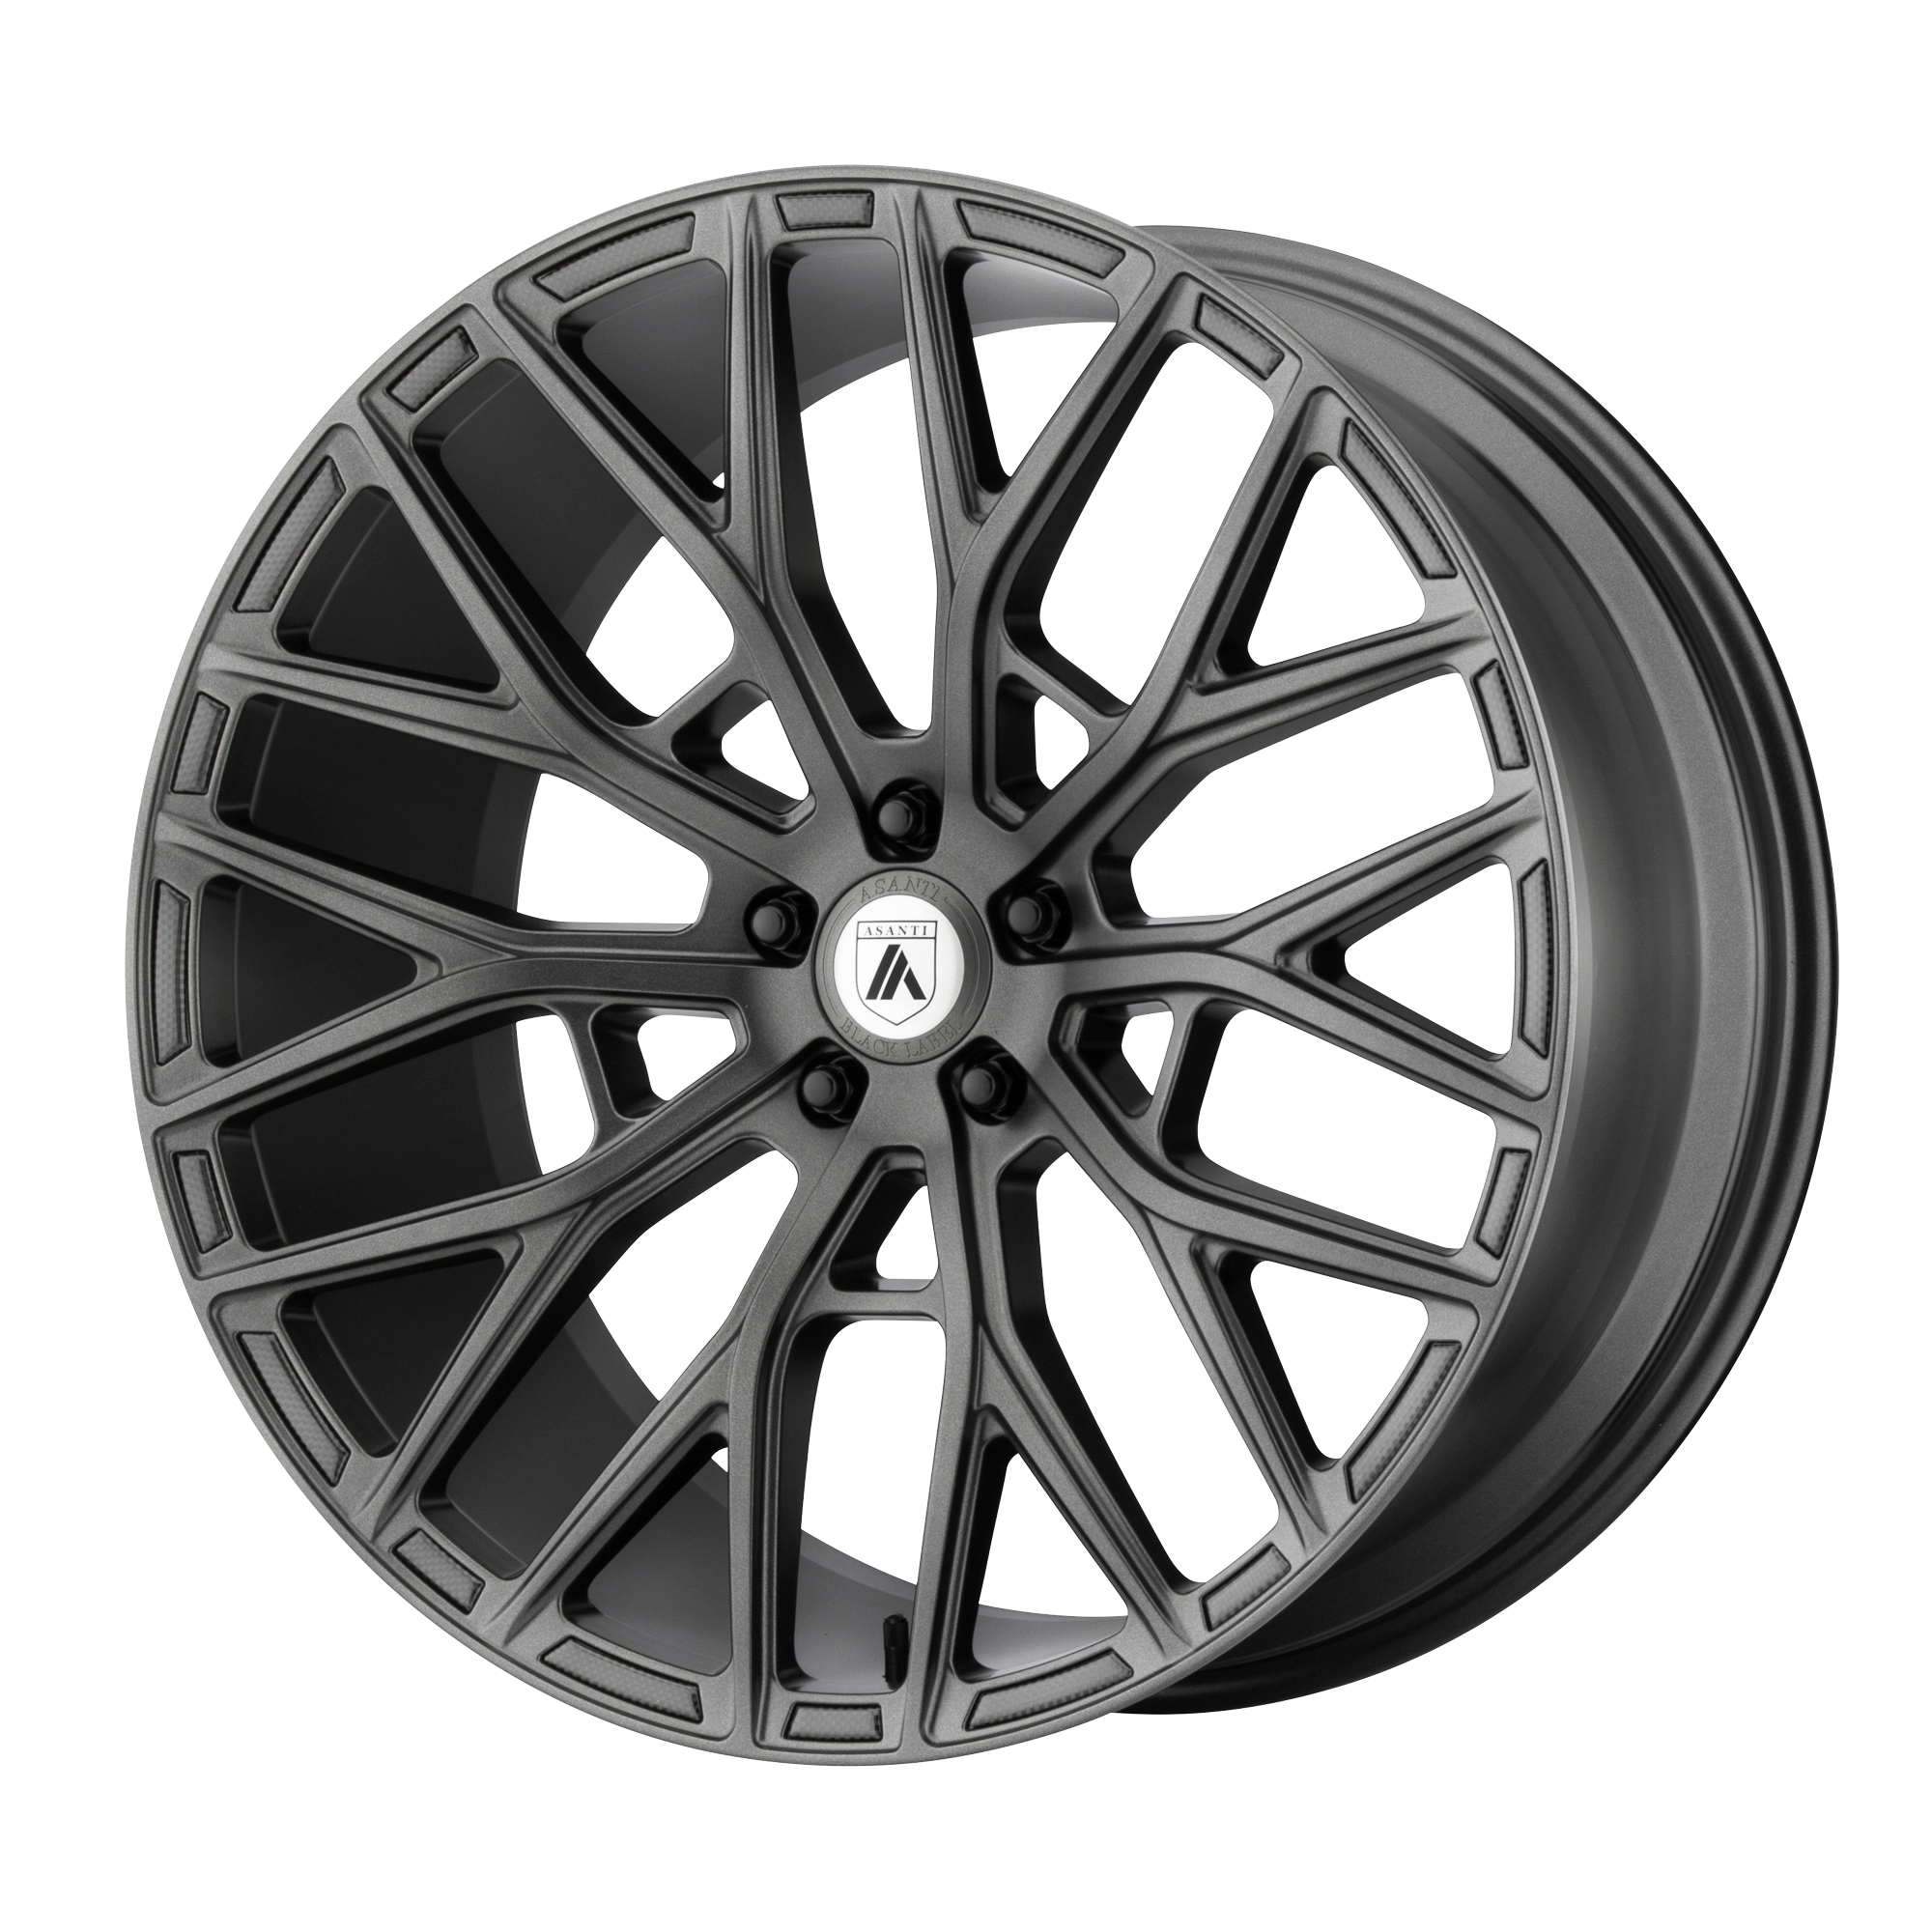 LEO 20x8.5 Blank MATTE GRAPHITE (38 mm) - Tires and Engine Performance